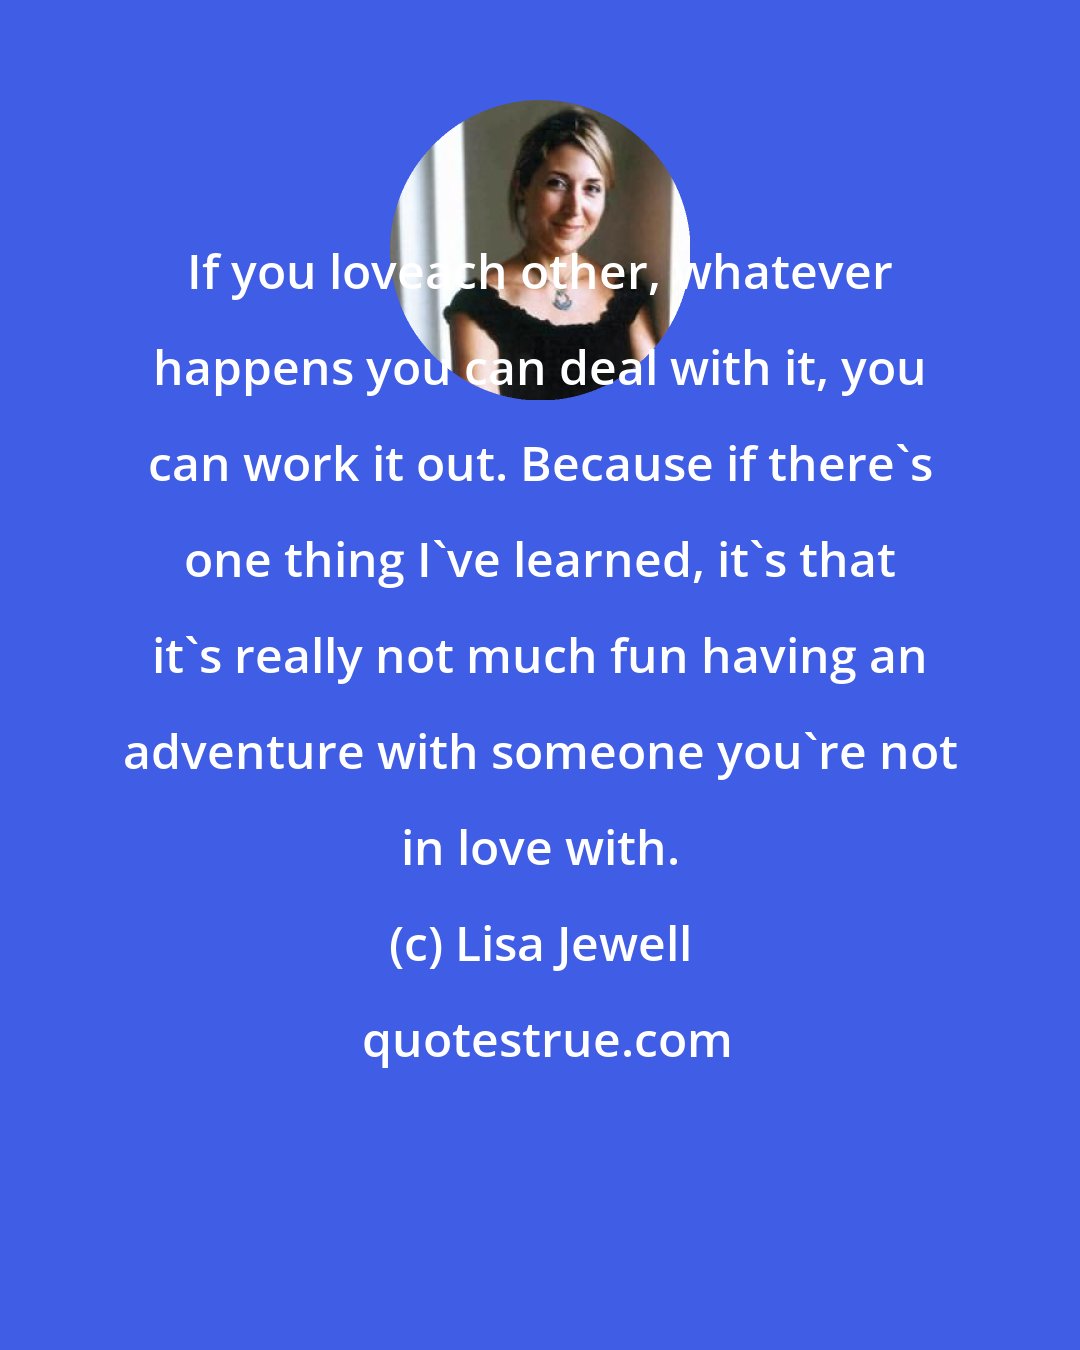 Lisa Jewell: If you loveach other, whatever happens you can deal with it, you can work it out. Because if there's one thing I've learned, it's that it's really not much fun having an adventure with someone you're not in love with.